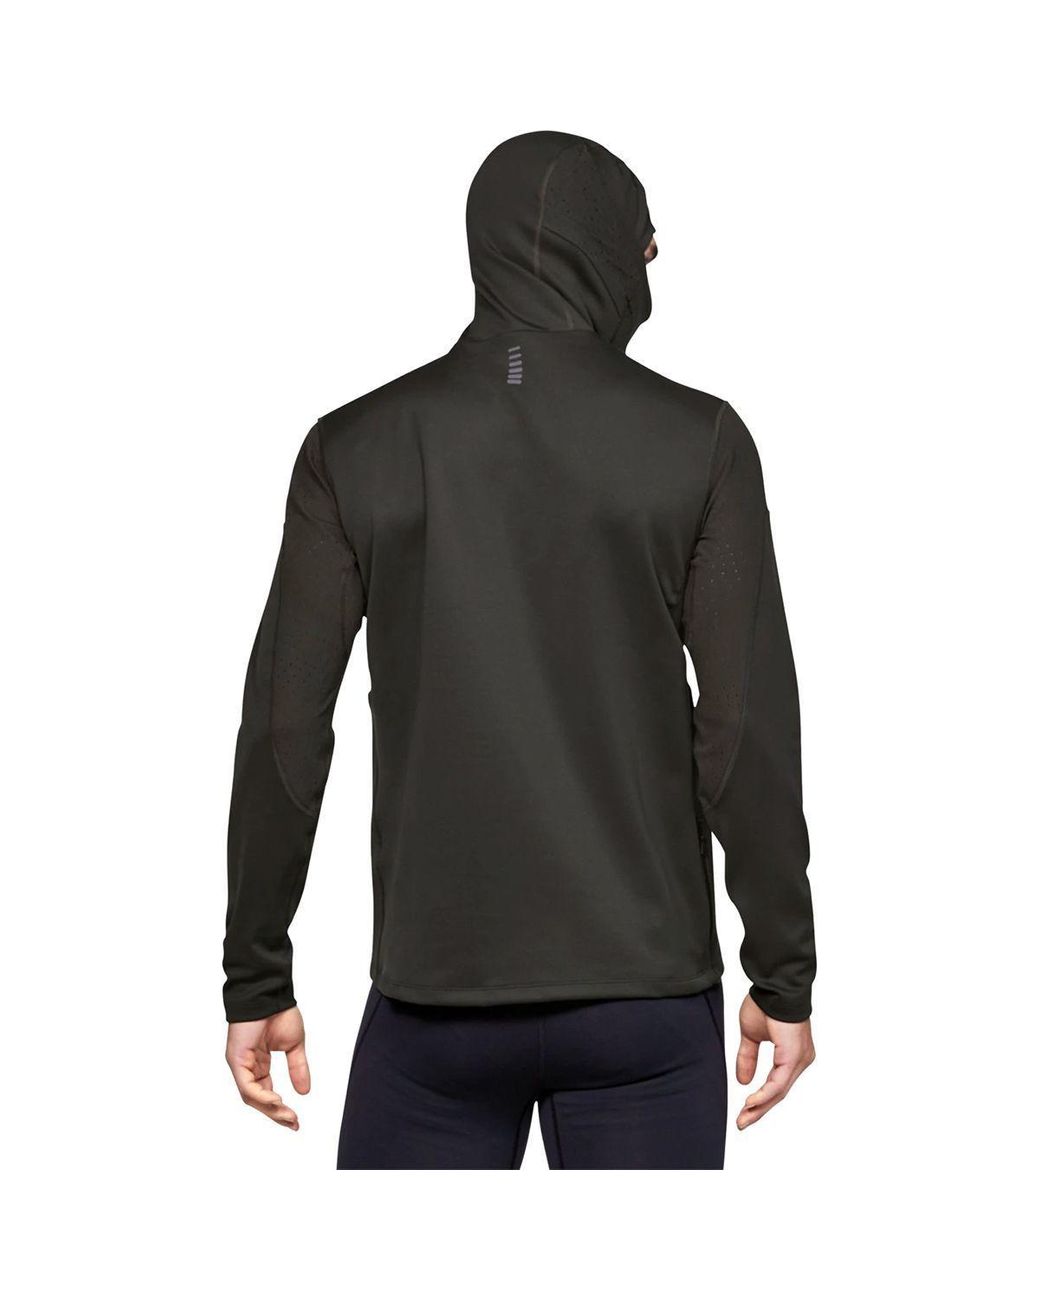 Under Armour Qualifier Coldgear Balaclava Hoodie in Green for Men